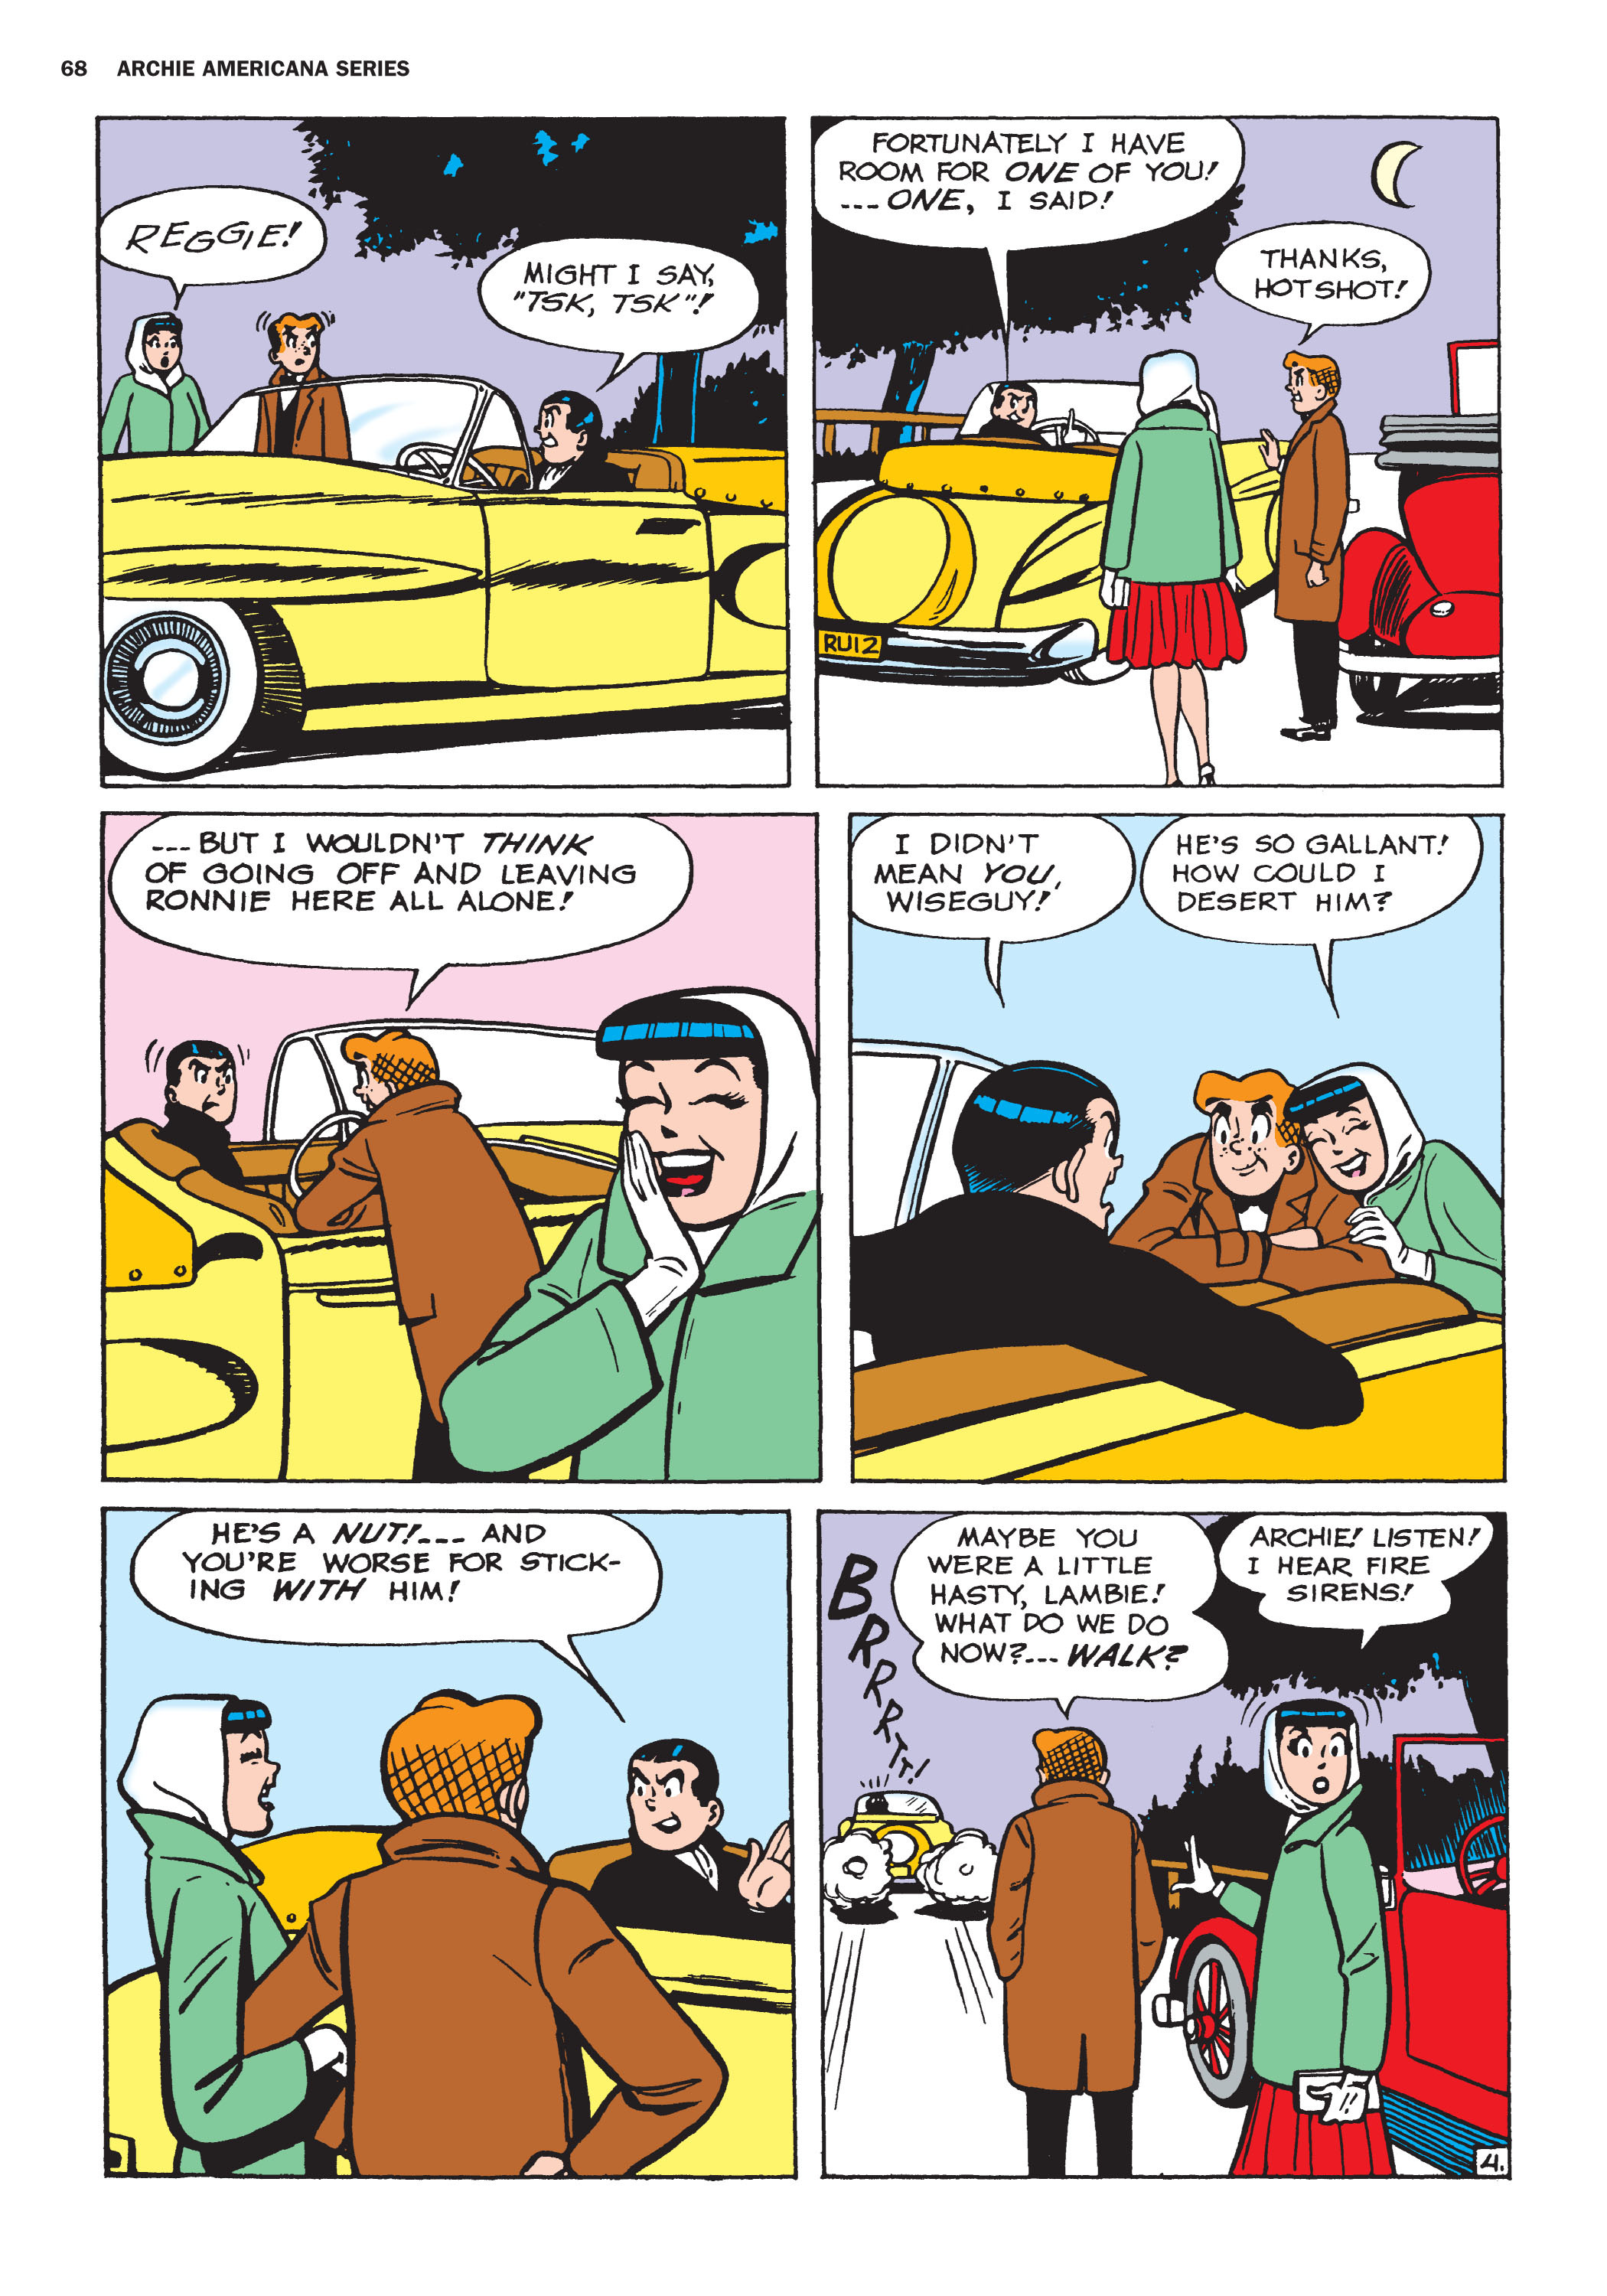 Read online Archie Americana Series comic -  Issue # TPB 8 - 69